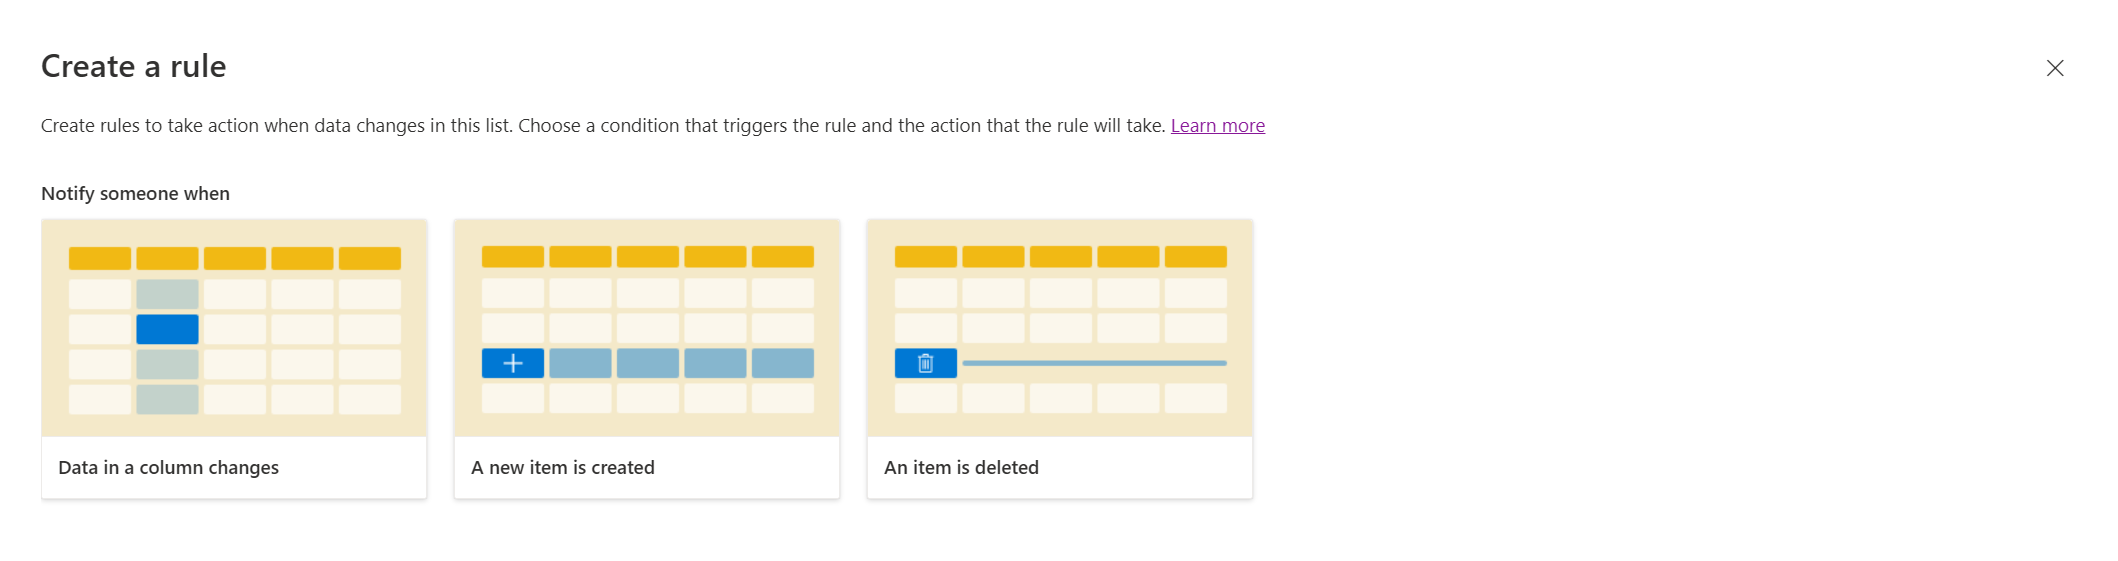 Dialog box to create a rule in SharePoint